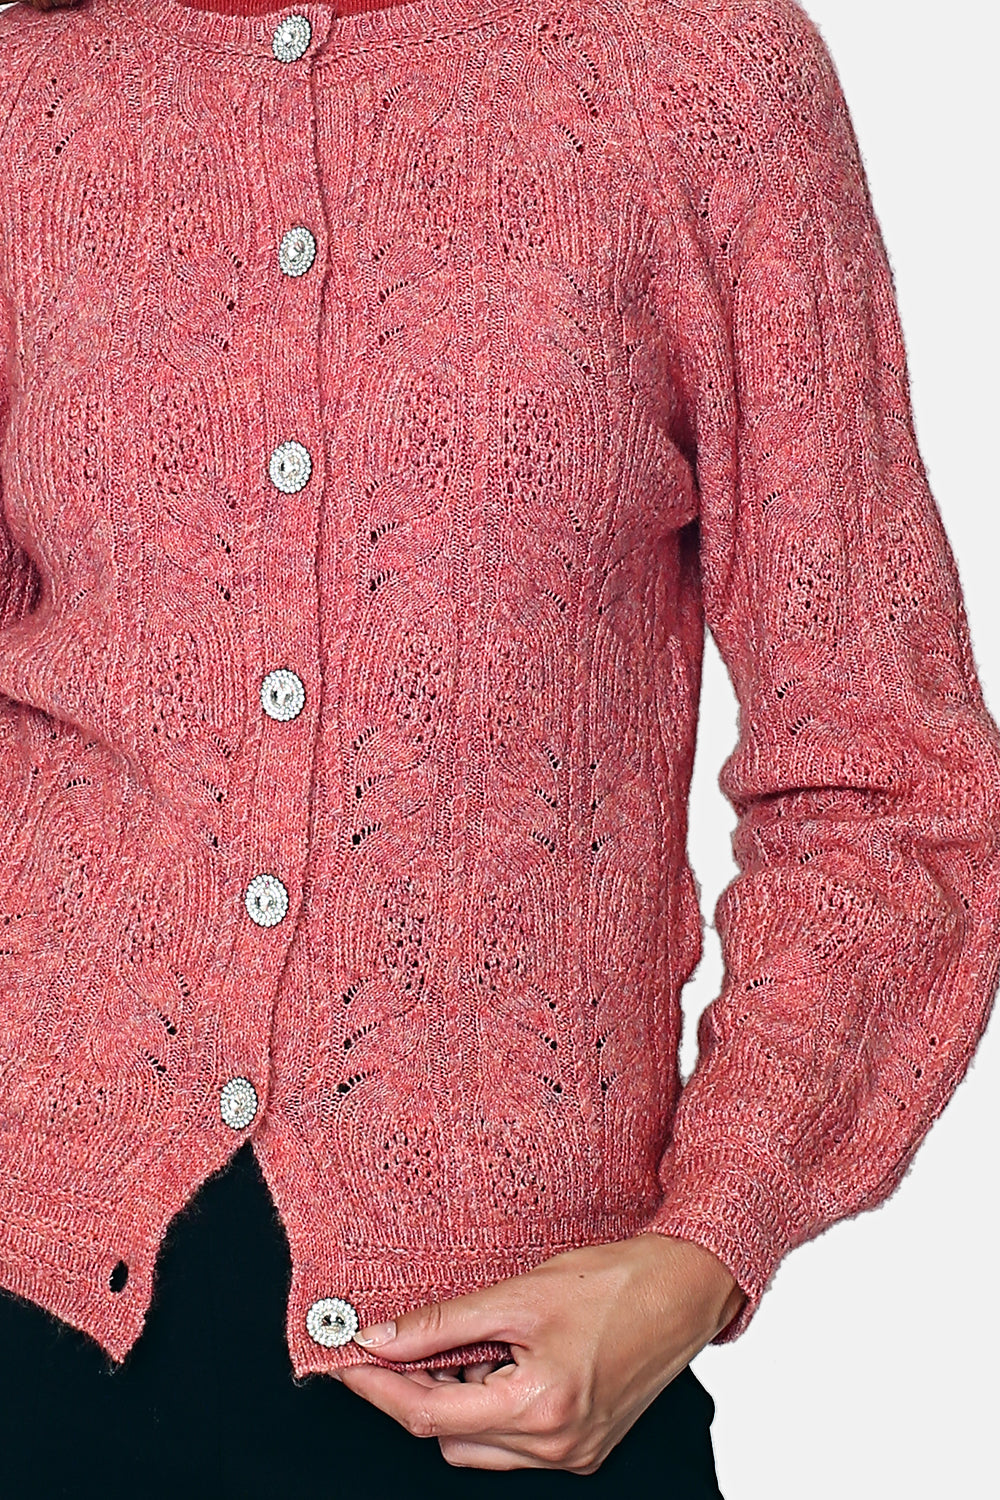 Round neck cardigan Diamond buttons with long sleeves slightly puffy in fancy knitting